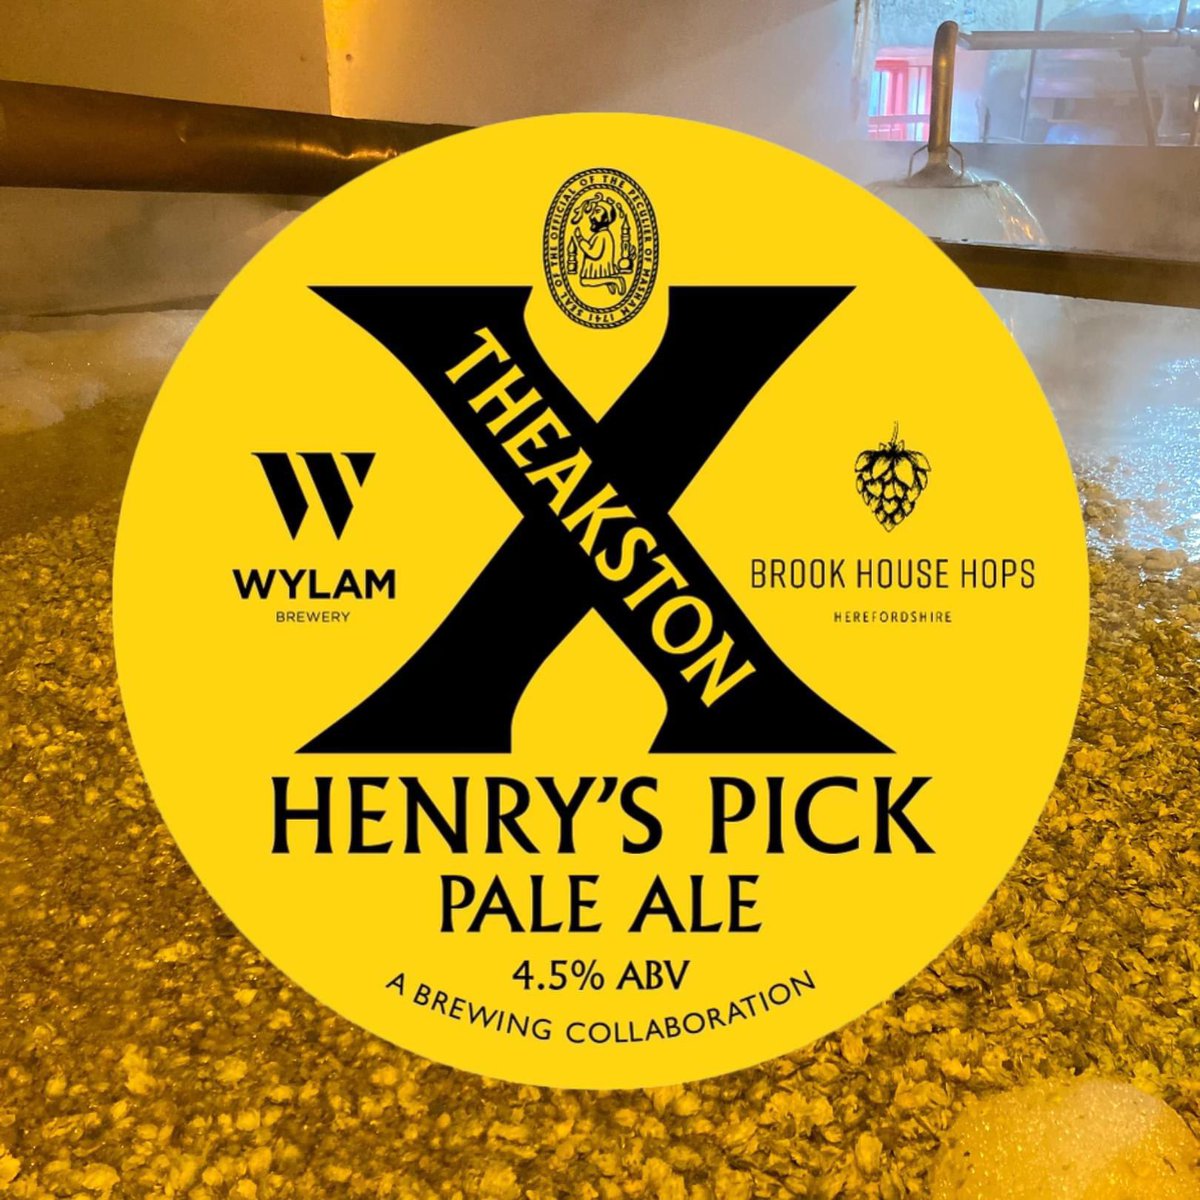 We’ve teamed up with @wylambrewery Brewery to create Henry’s Pick, our first-ever collaboration beer! 🍻 A 4.5% pale ale, brewed with a Theakston grist of pale, lager & Munich malts & Wylam’s choice of freshly harvested Challenger, Admiral & Pilgrim hops from @brookhousehops